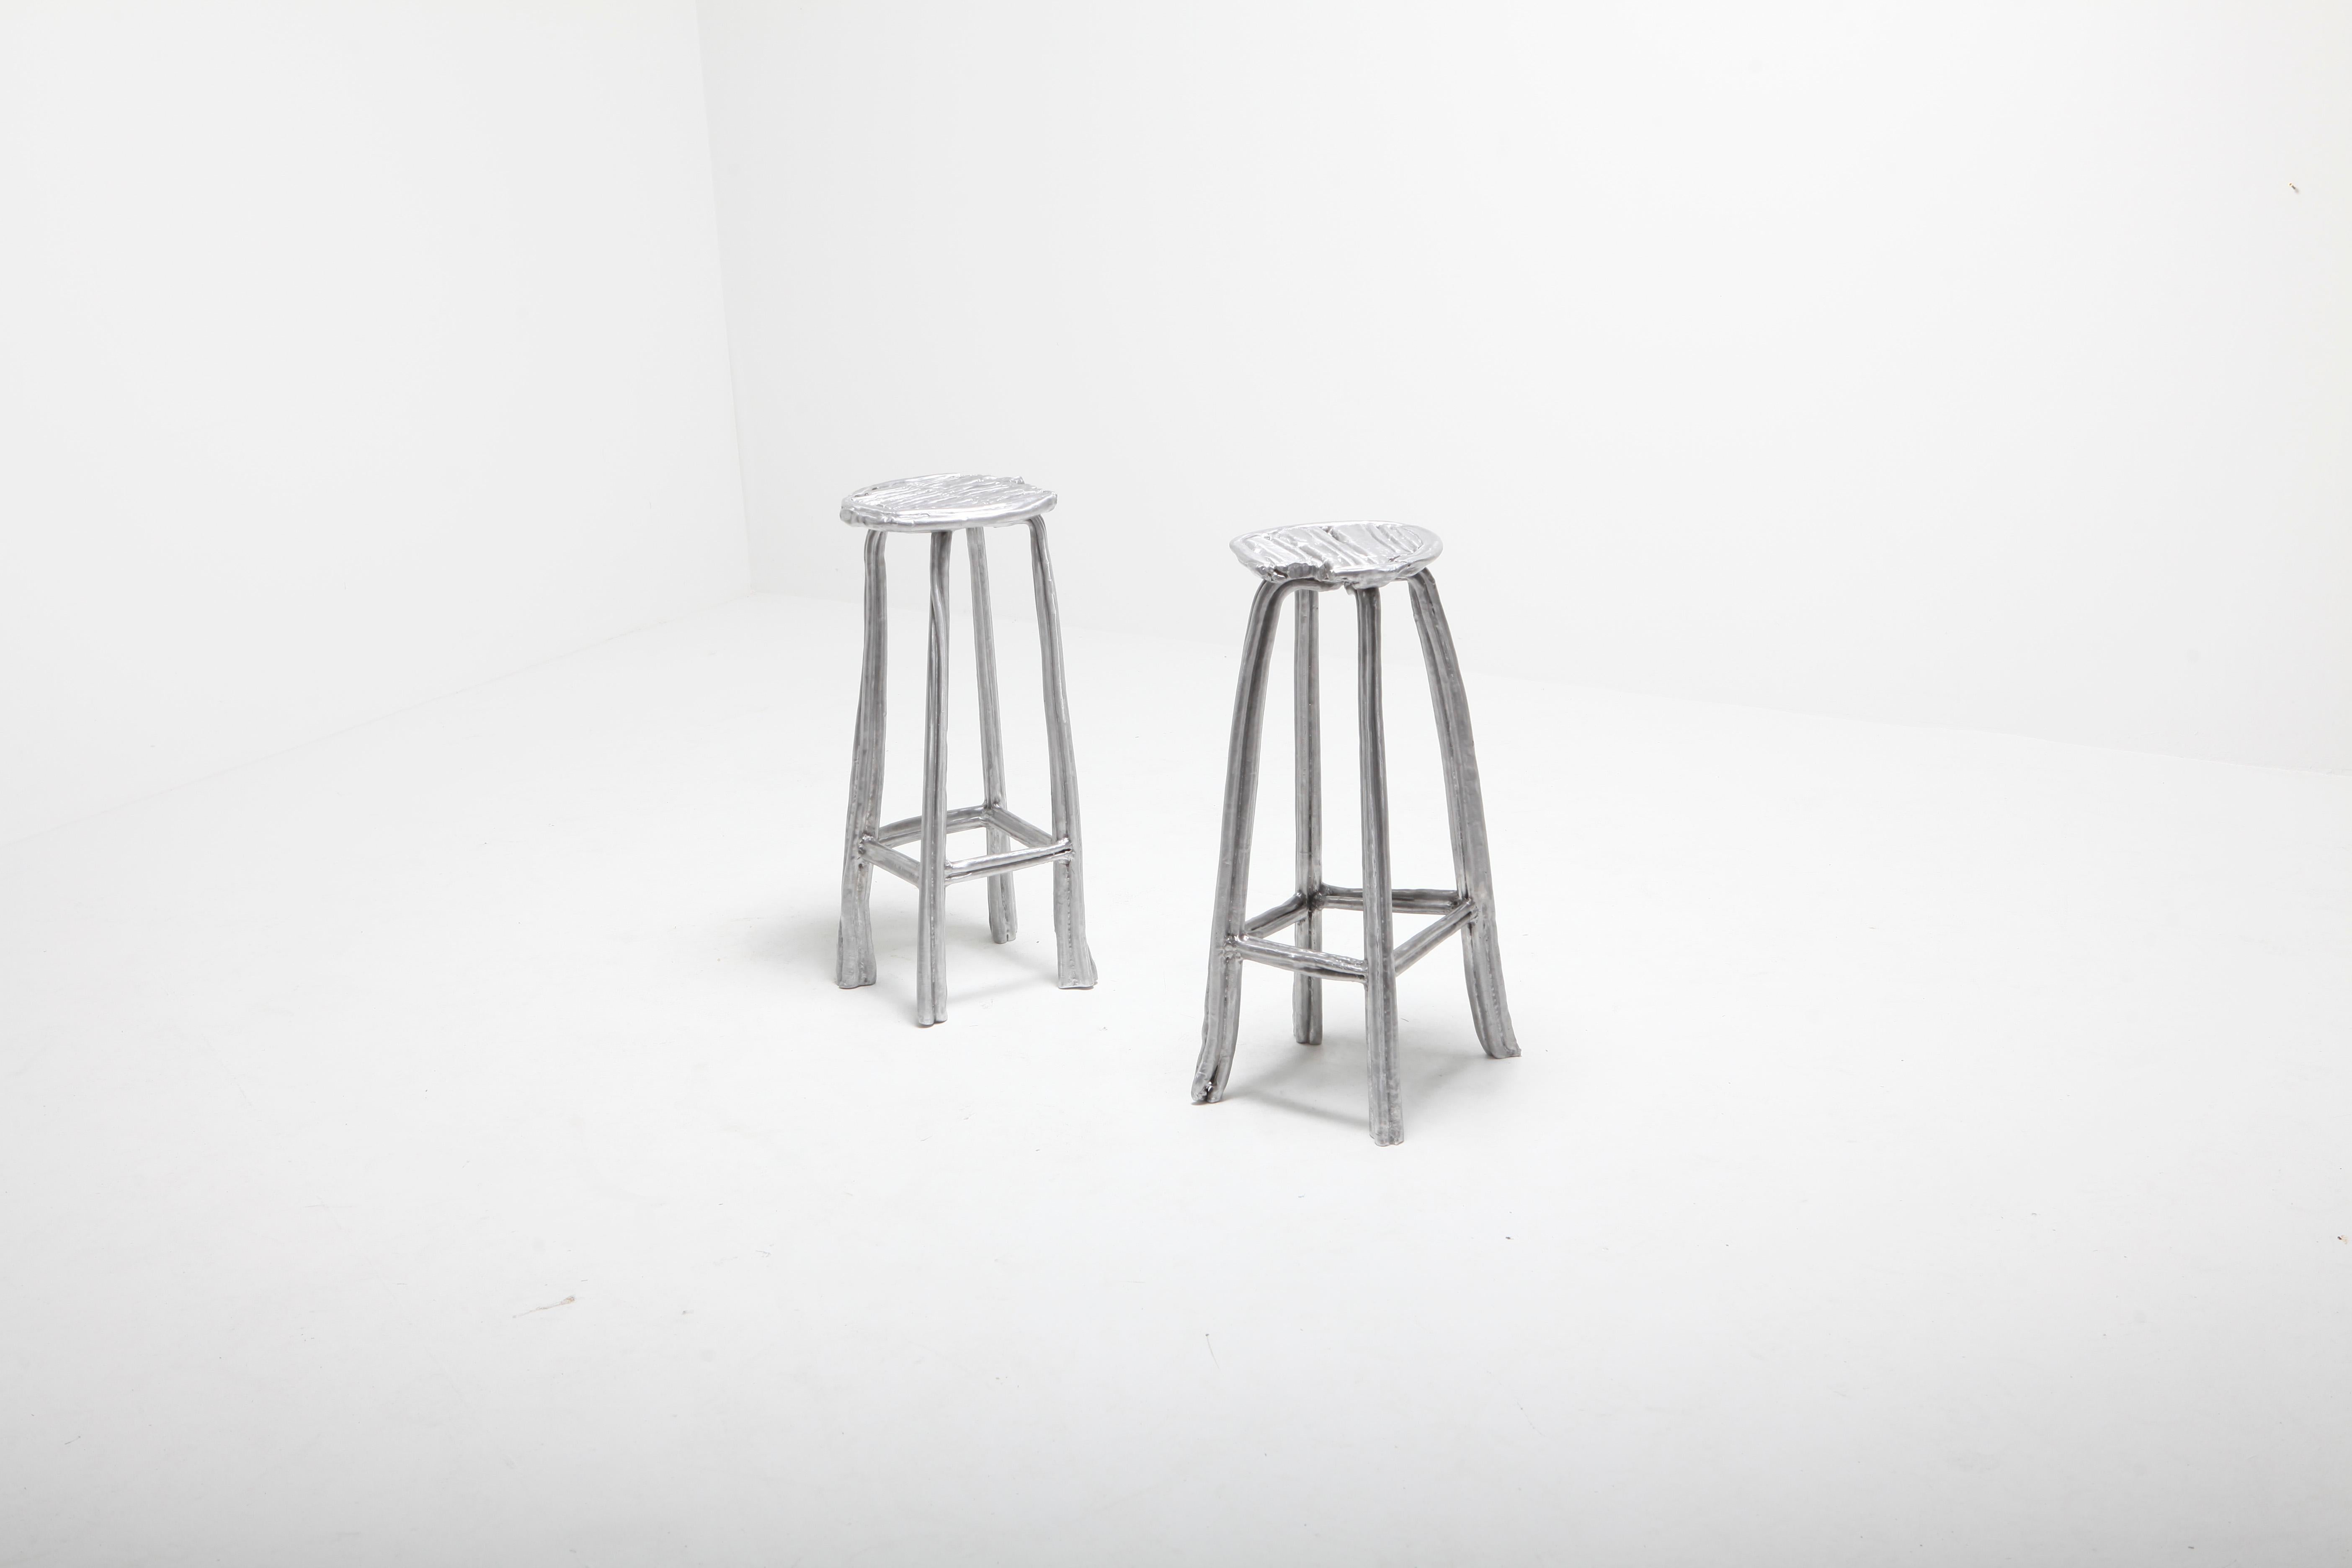 Set of 2 bar stools by Studio Nicolas Erauw.
Unique piece. Limited Edition 1 of 1.

Dimensions: 
- H 70 cm x Ø 33 cm
- H 70 cmx Ø 35 cm

Materials: Aluminum, wax dipped

Part of the on-going ‘Wax on/Wax off series’. These series are a